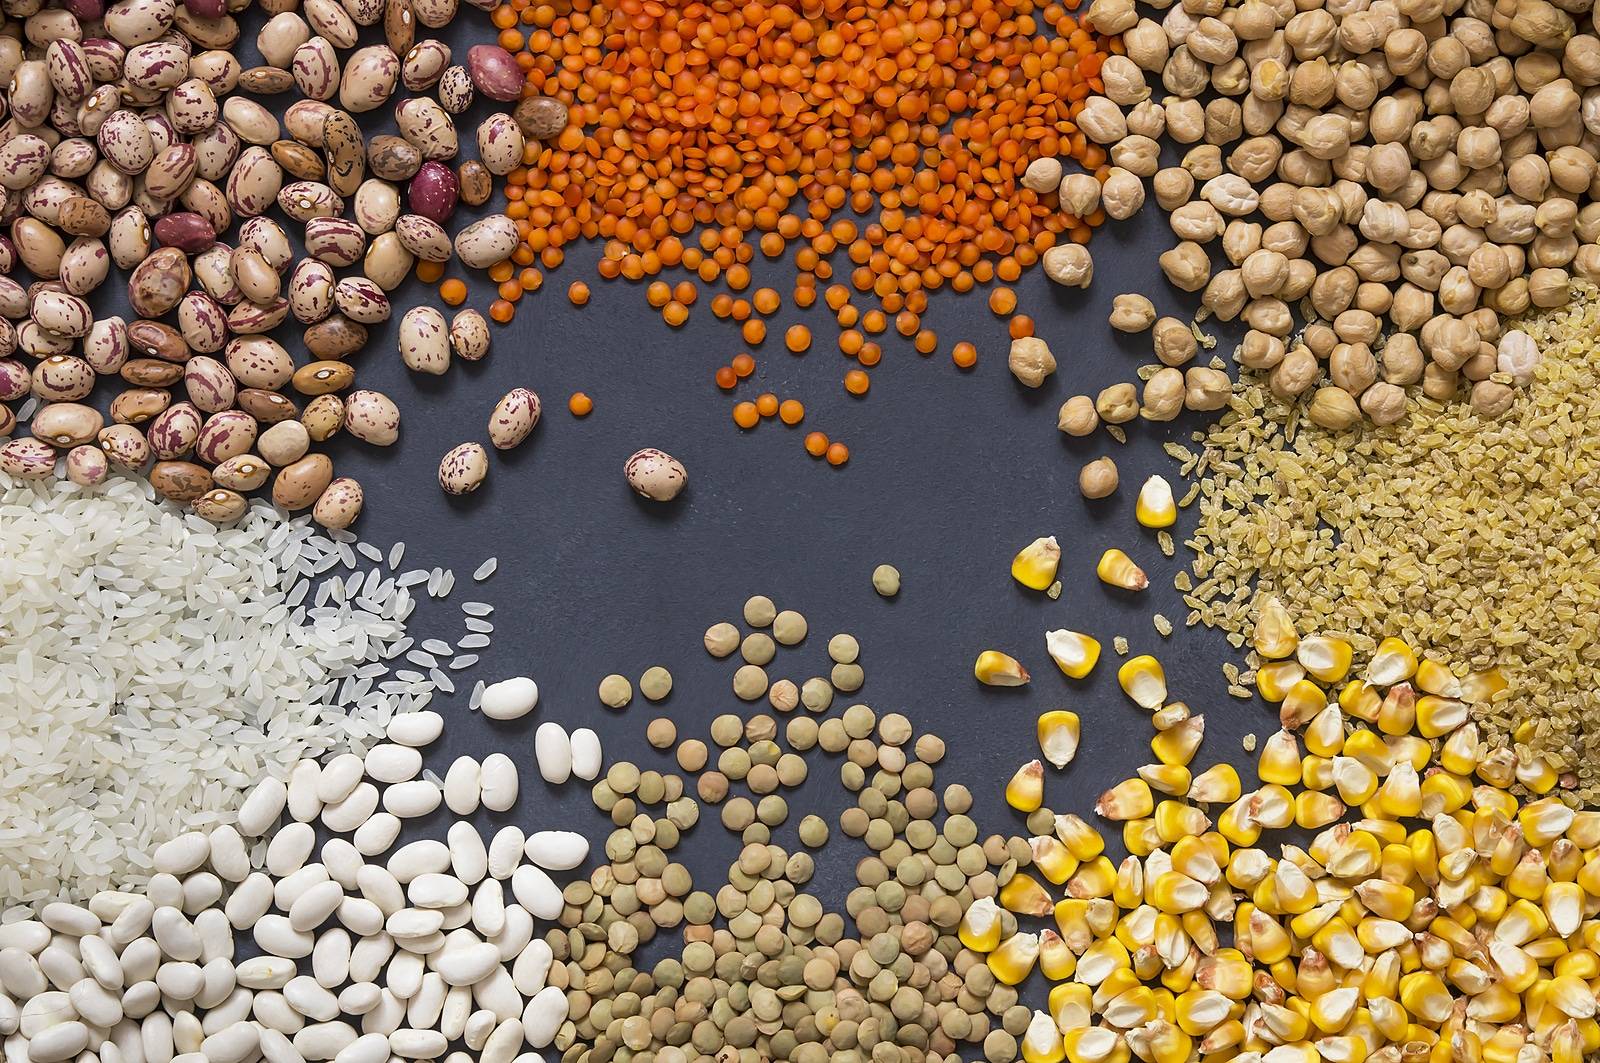 Food that Help Fight Cancer - Legumes